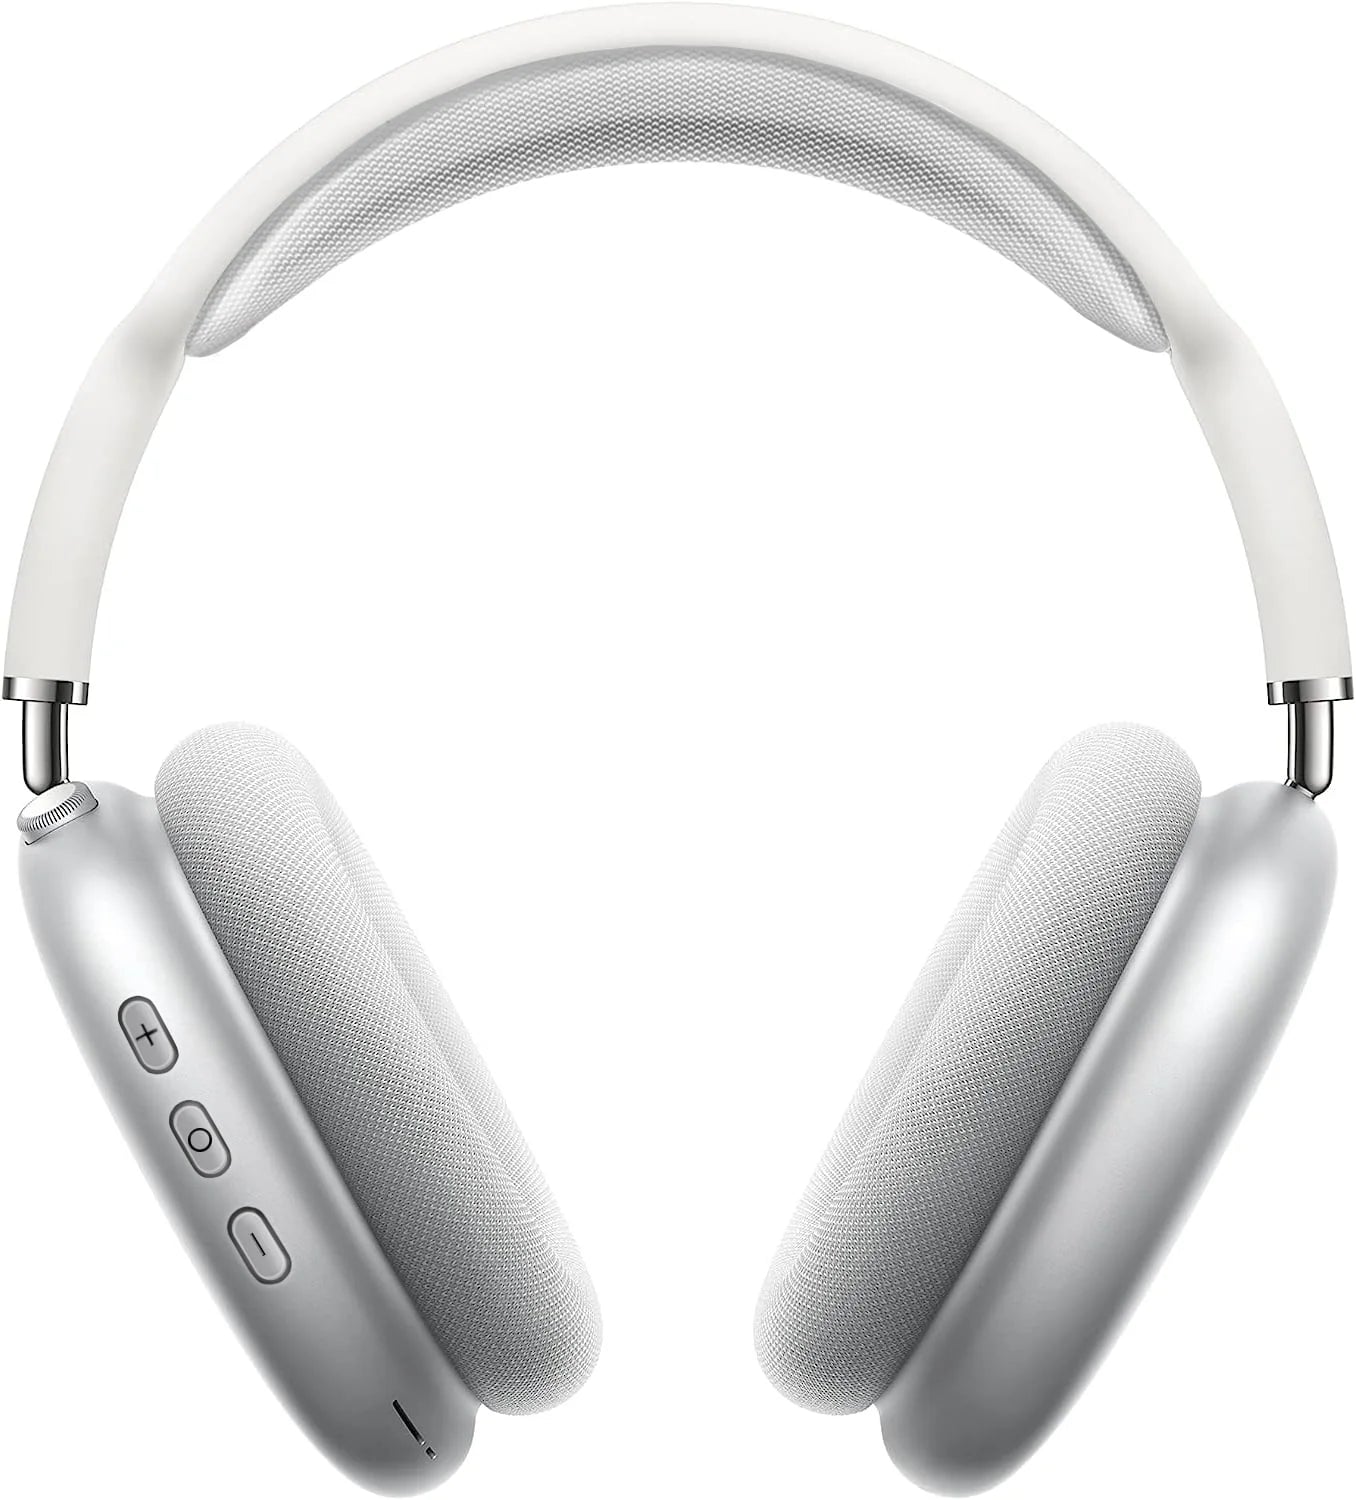 Pro Wireless Headphones with Bluetooth- IOS and Android